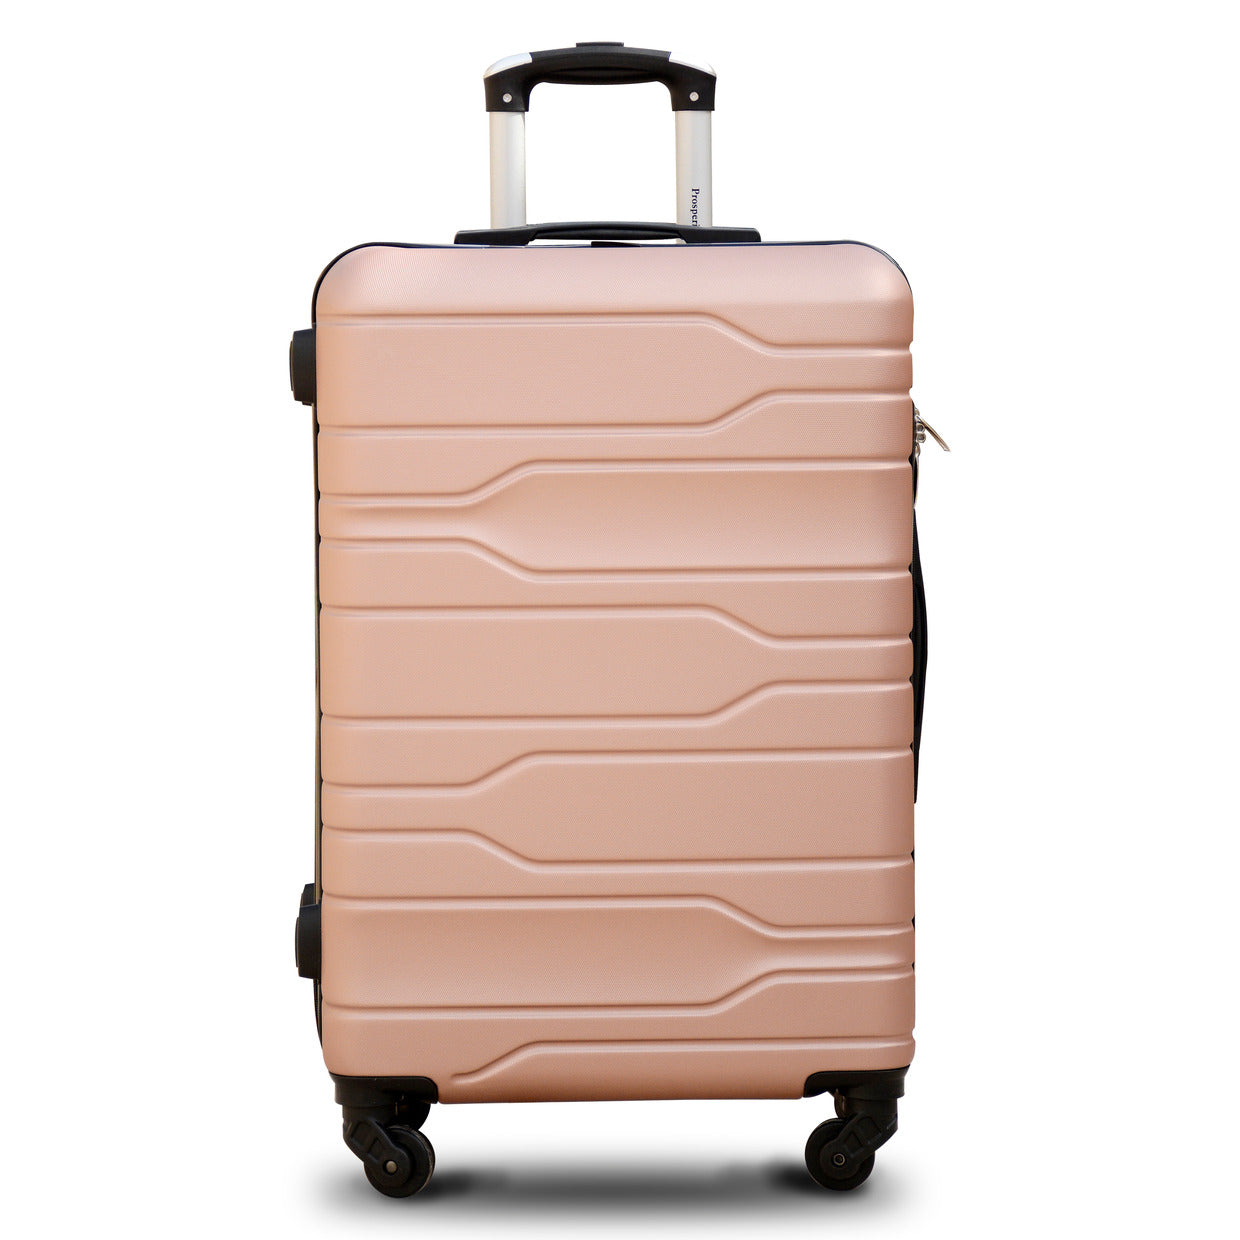  Rose Gold Colour Prosperity ABS Lightweight Luggage Bag With Spinner Wheel Zaappy